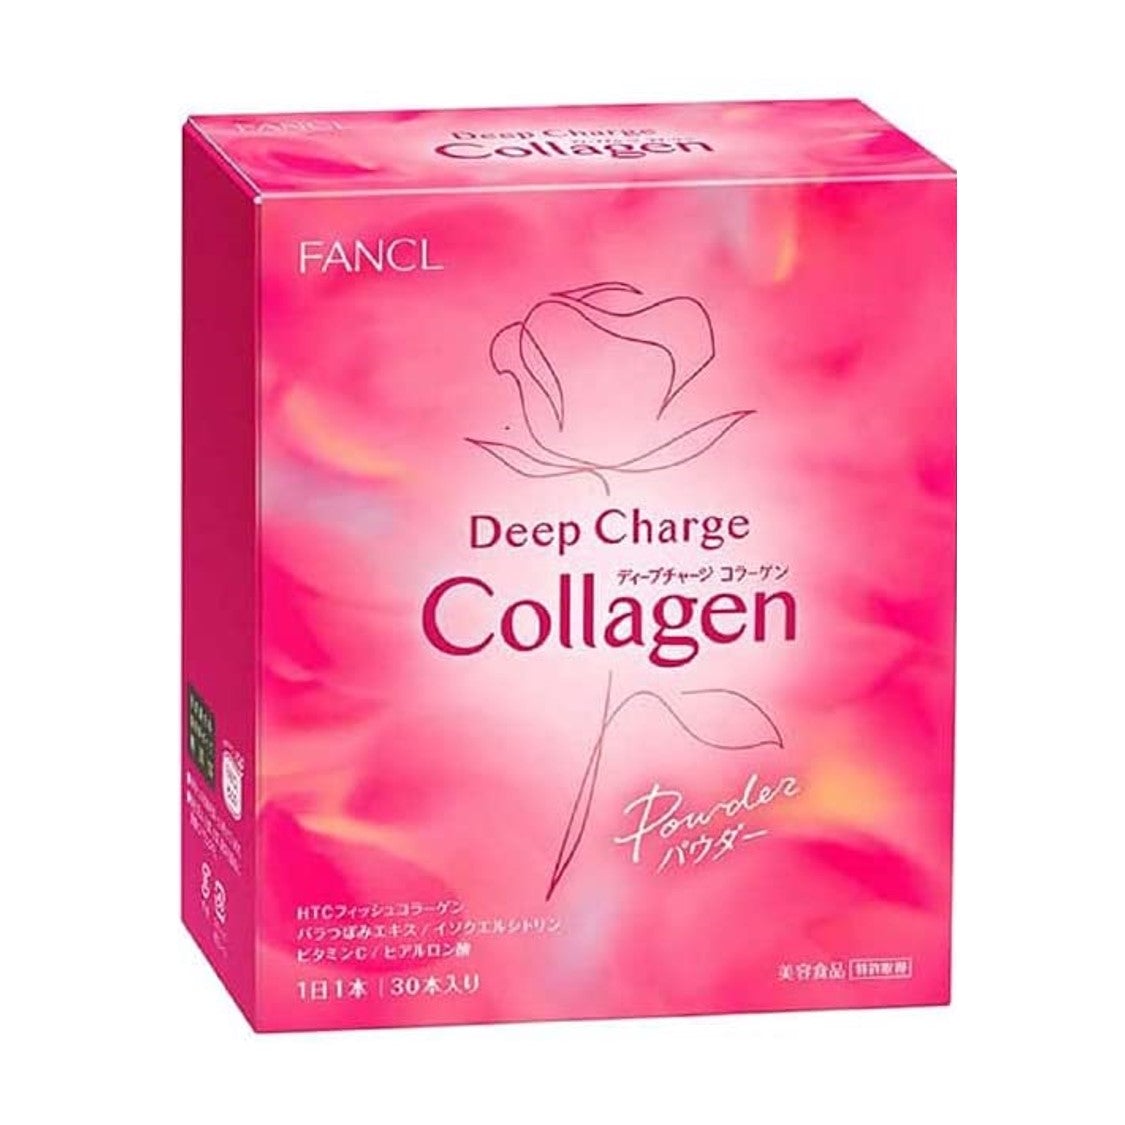 fancl-deep-charge-collagen-powder-30days-serving-newpackage